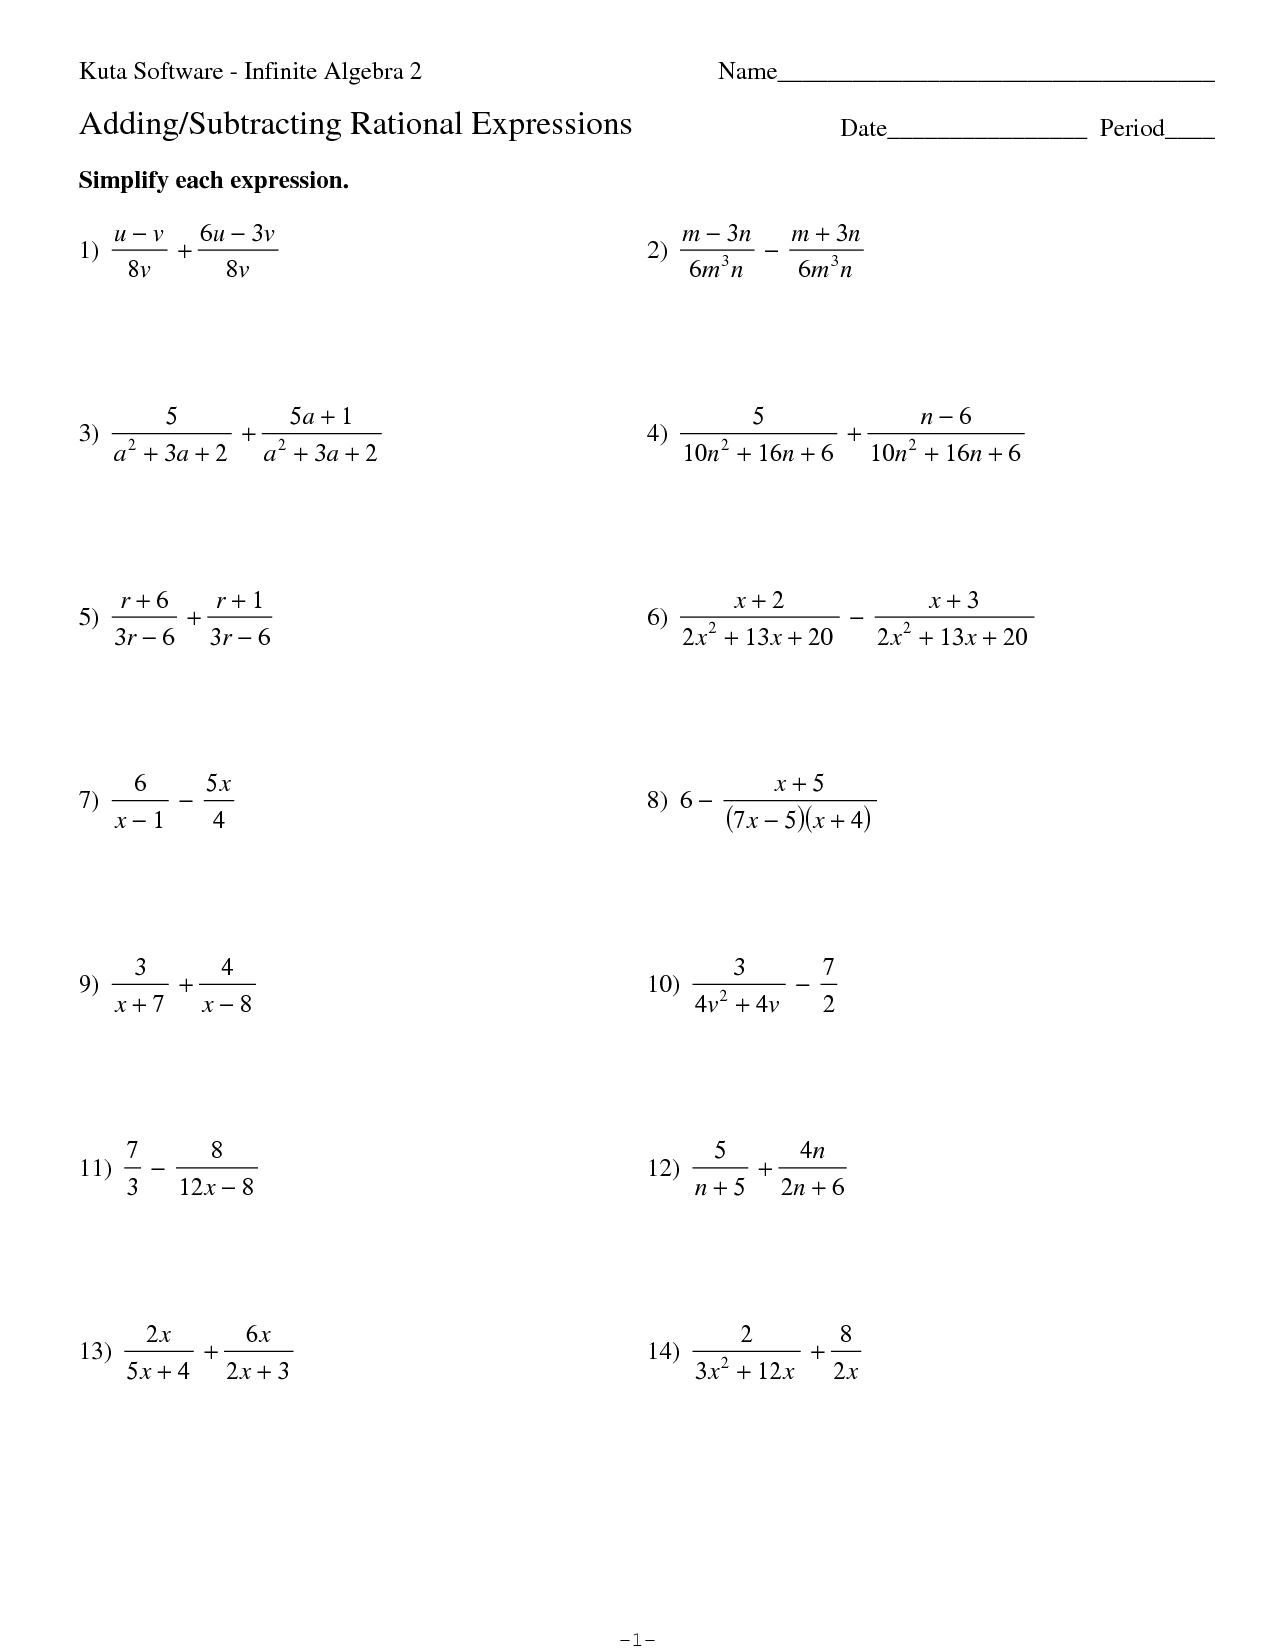 kuta-software-angles-in-quadrilaterals-worksheet-for-9th-12th-grade-lesson-planet